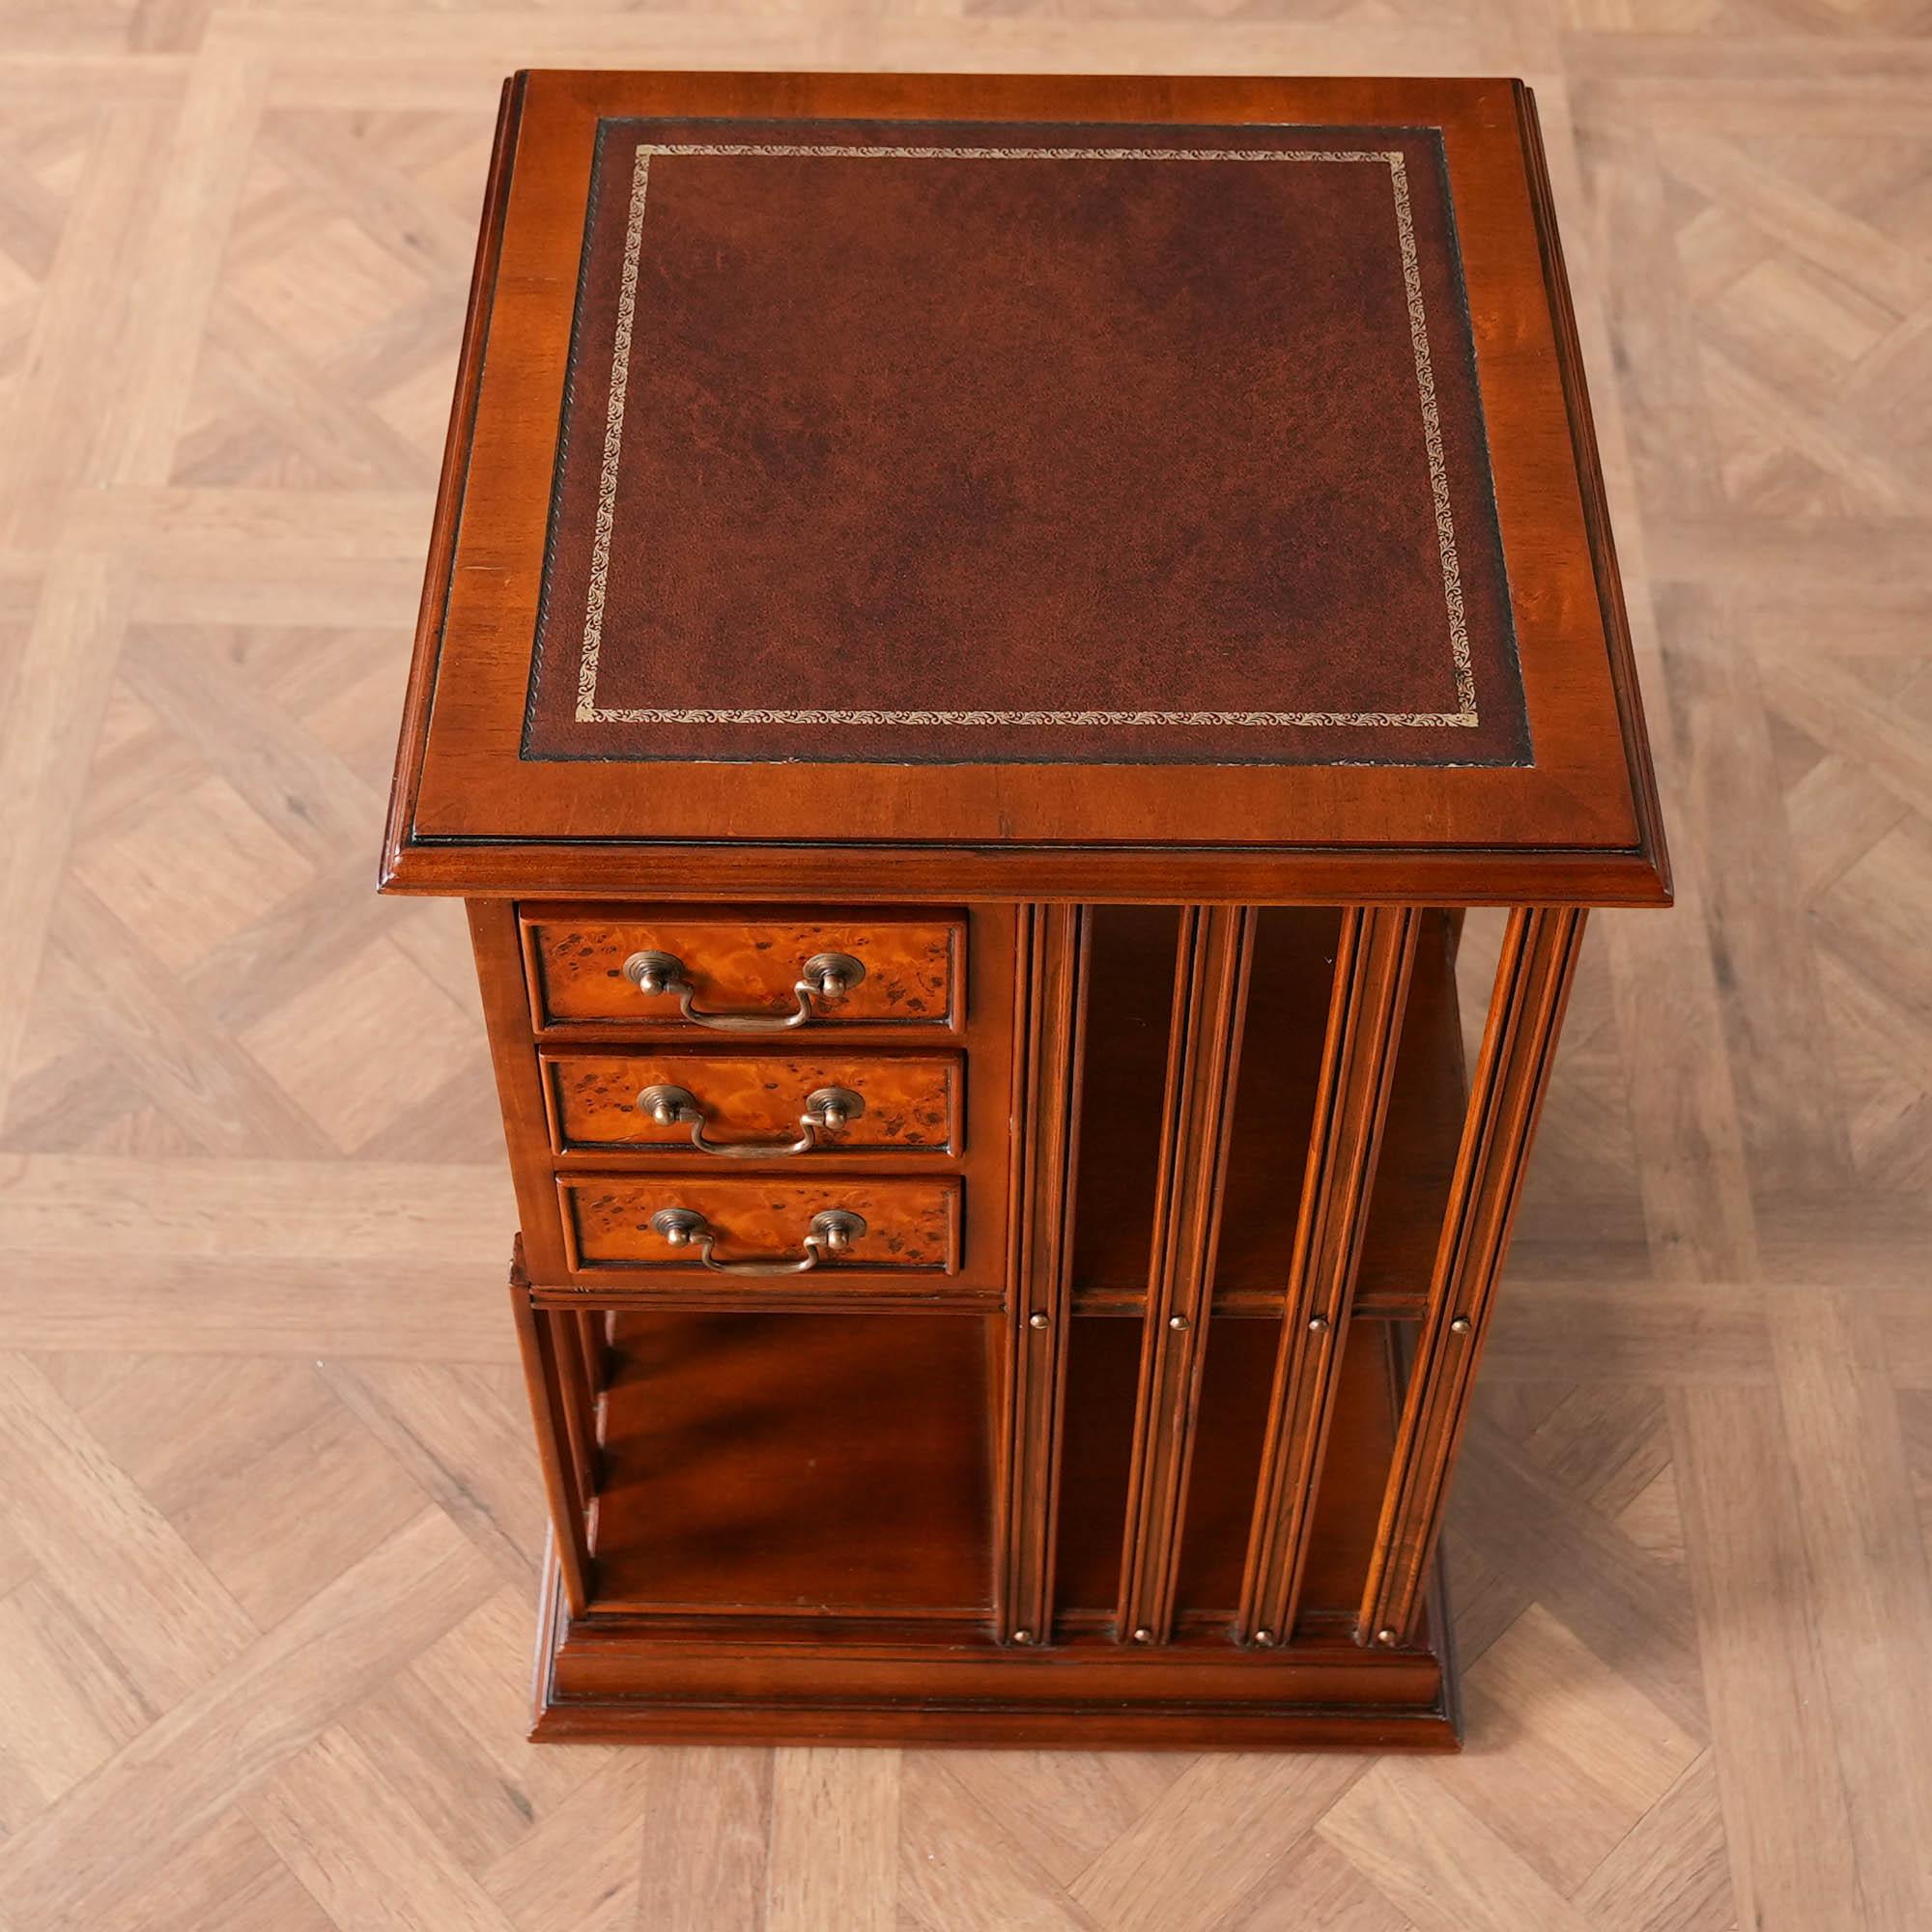 A Country Estate Revolving Bookcase from Niagara Furniture with full grain leather top with a shaped molding surround, over top three dovetailed drawers and numerous supported storage spaces, all accented with brass headed screws and hardware. The